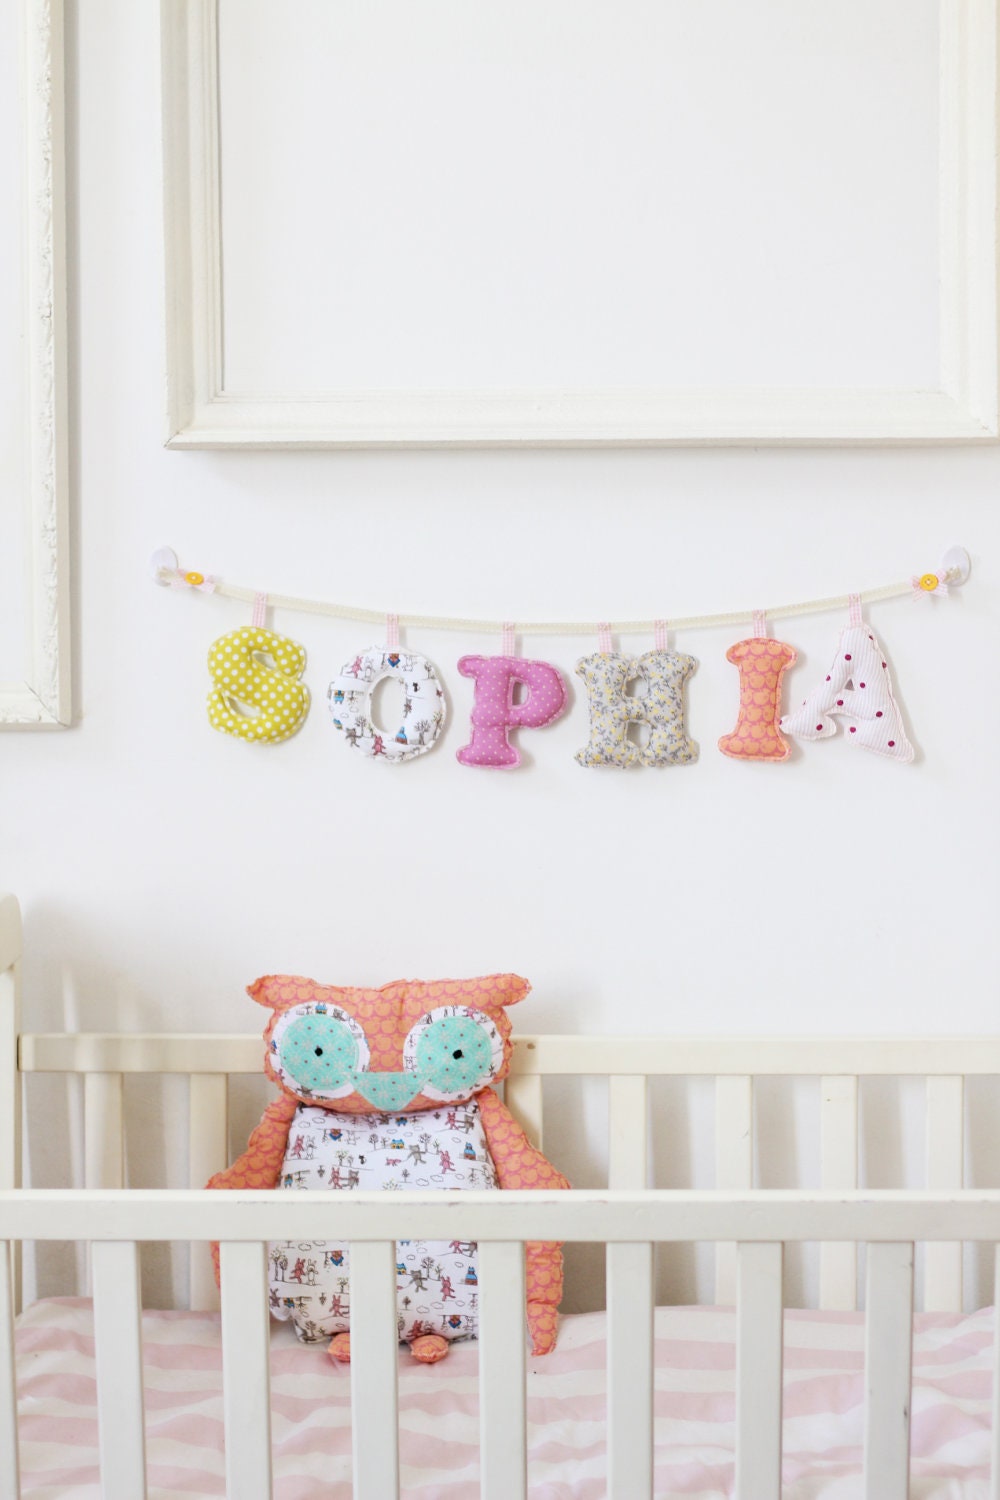 Popular items for Baby Name Decor on Etsy